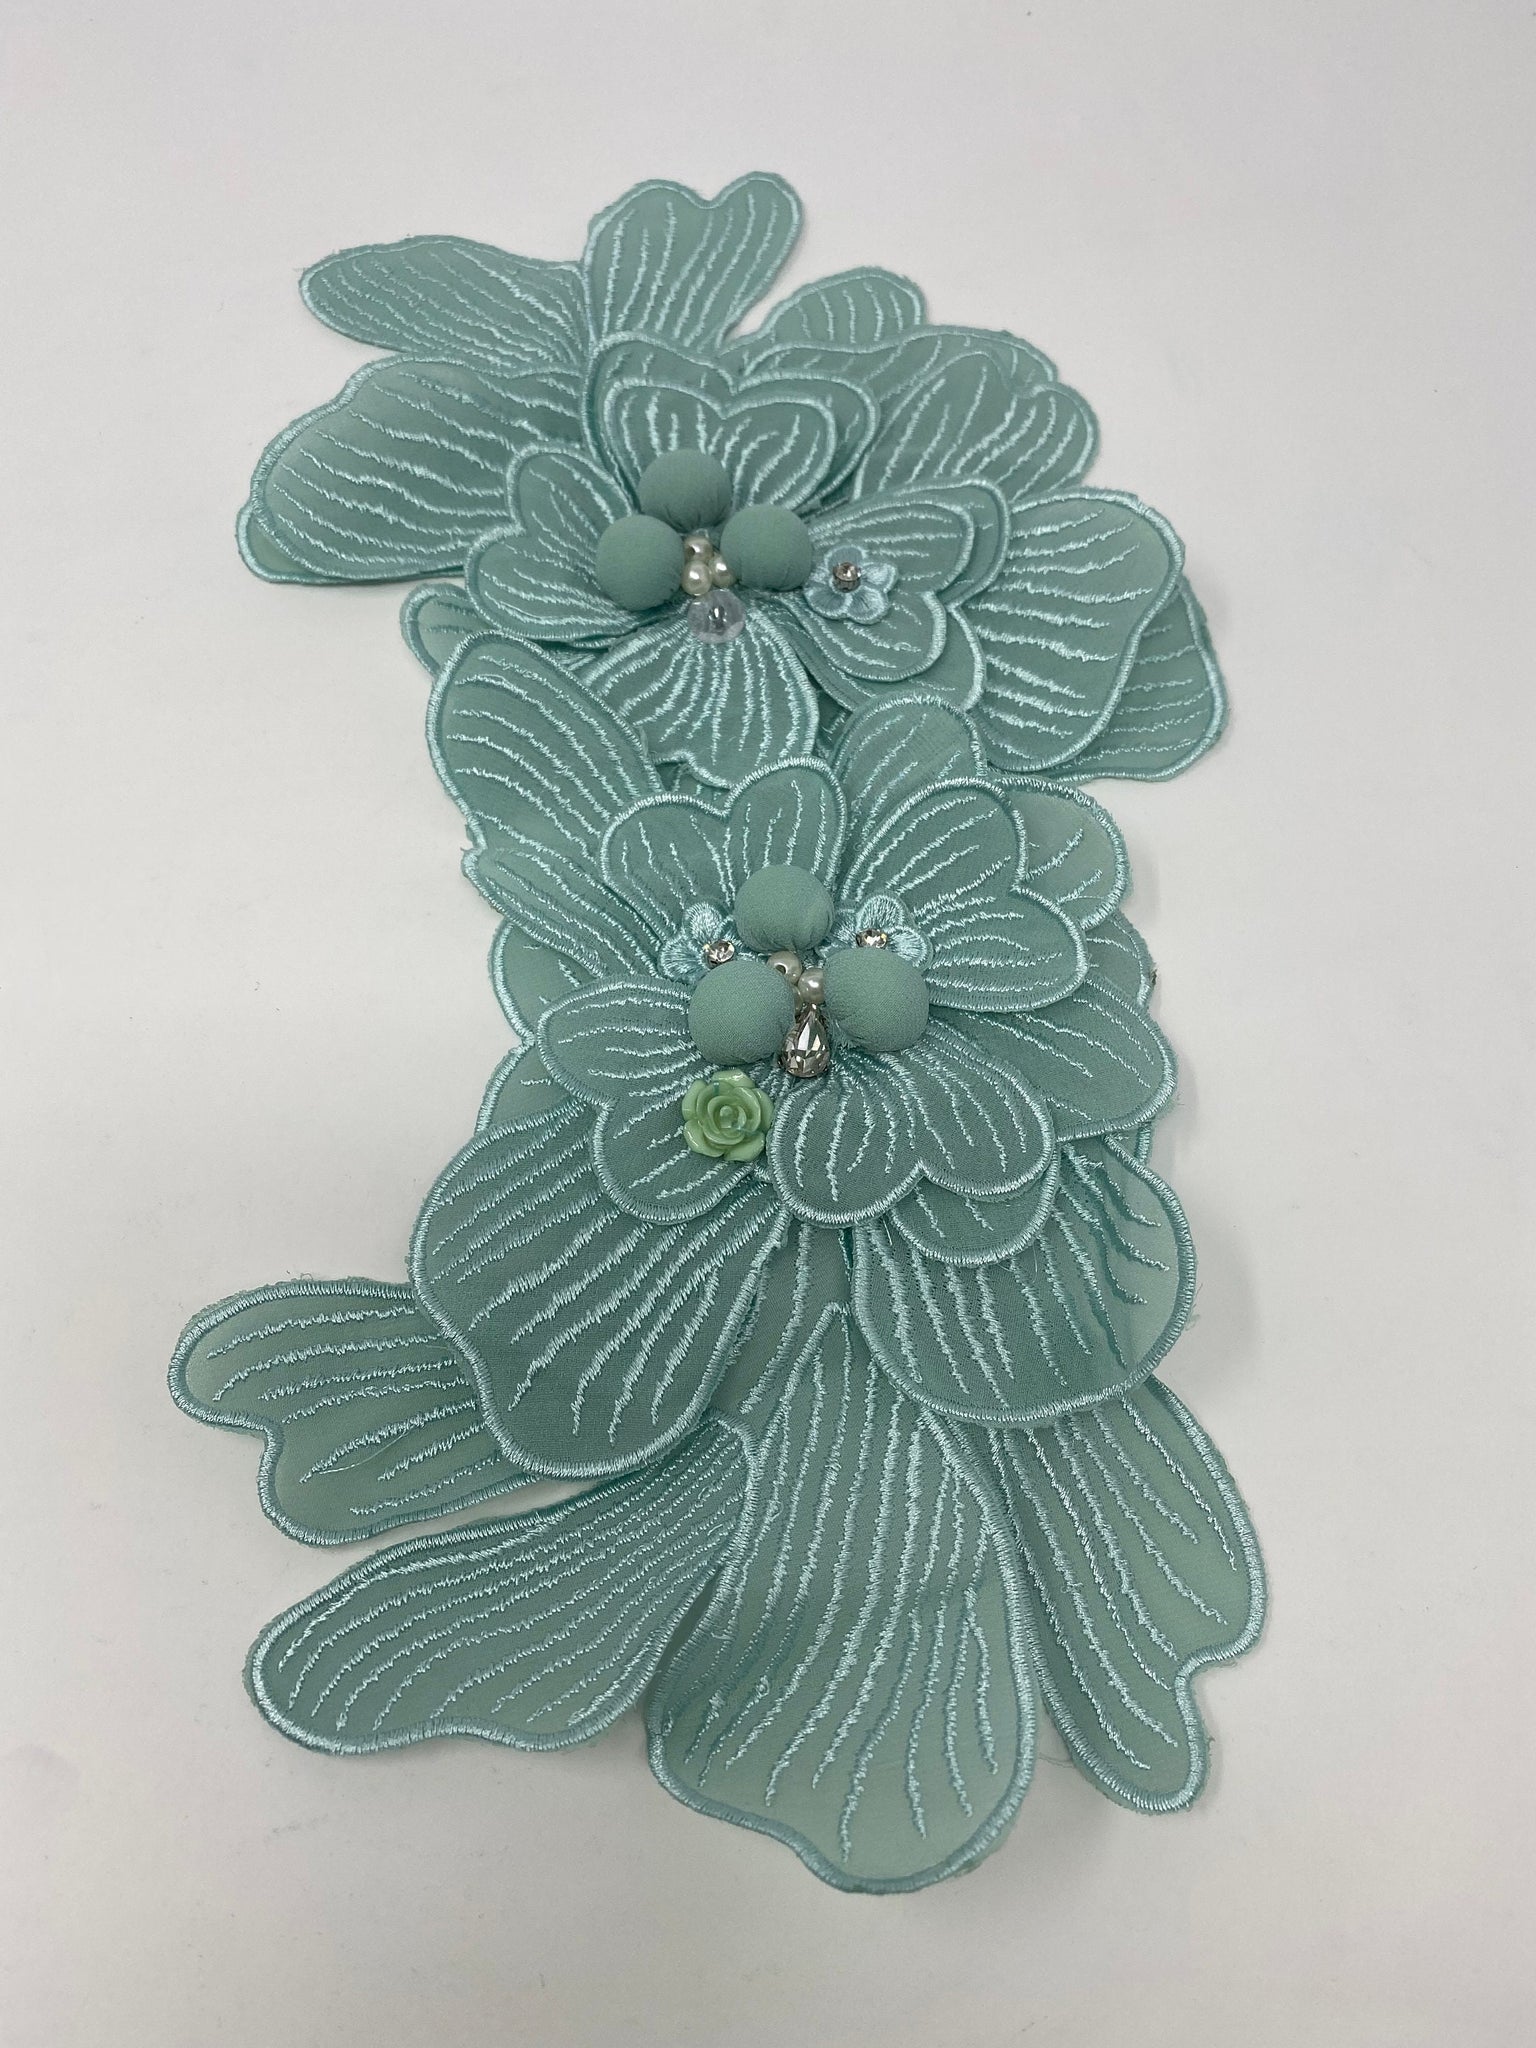 NEW, Exclusive, "Seafoam Green Flower ," Size 12'', (sew-on) Fashion Applique, Patch for Denim Jacket, Camo, Sweaters